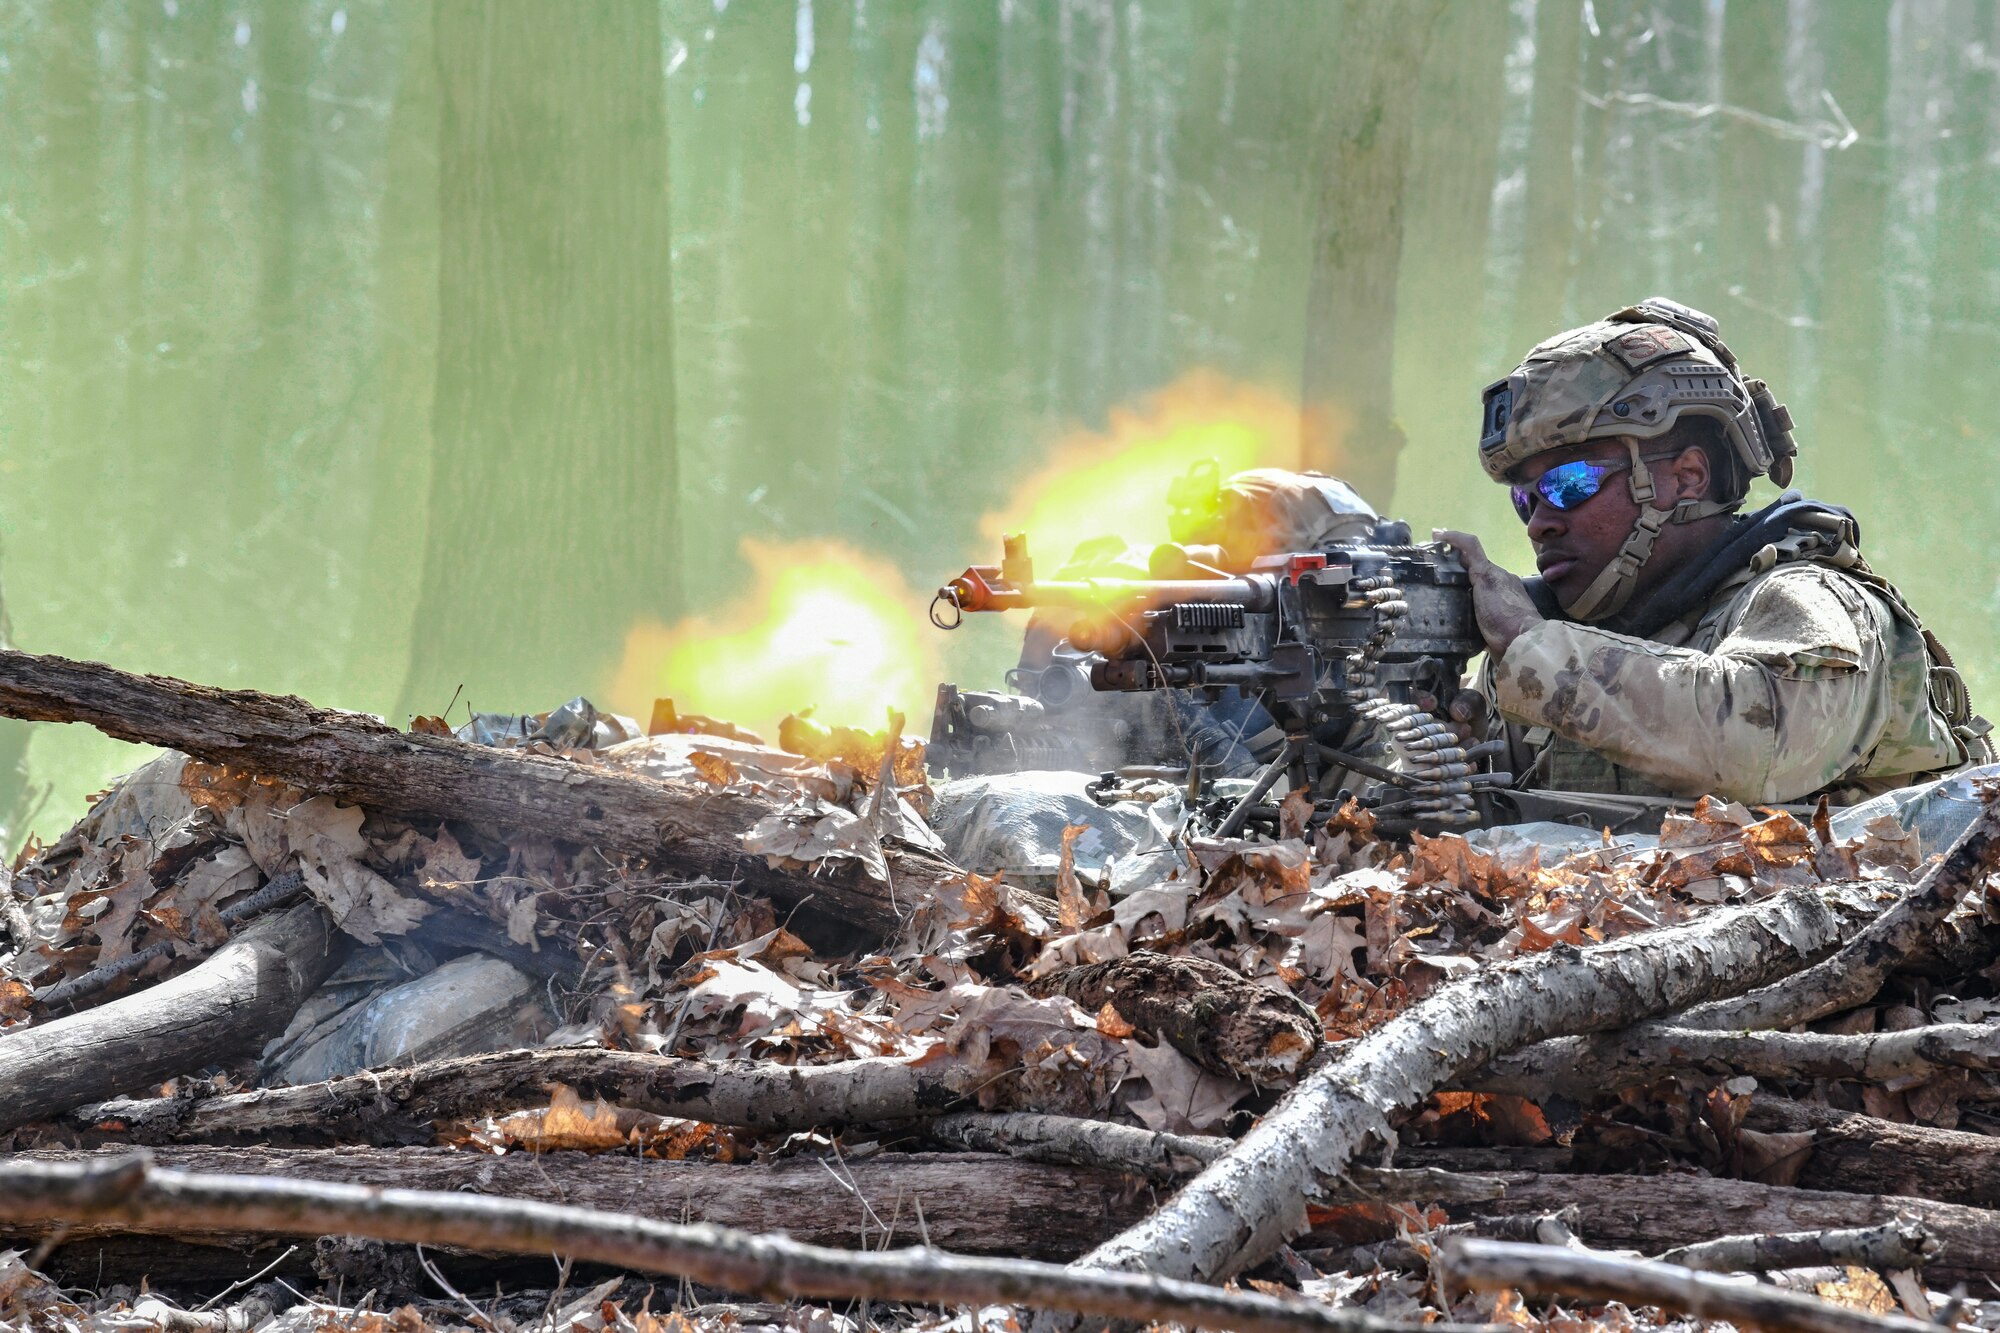 Airman 1st Class Jhi Nichols, a fireteam member assigned to the 459th Security Forces Squadron, Joint Base Andrews, Maryland, fires a M240B machine gun at Camp James A. Garfield Joint Military Training Center, Ohio.